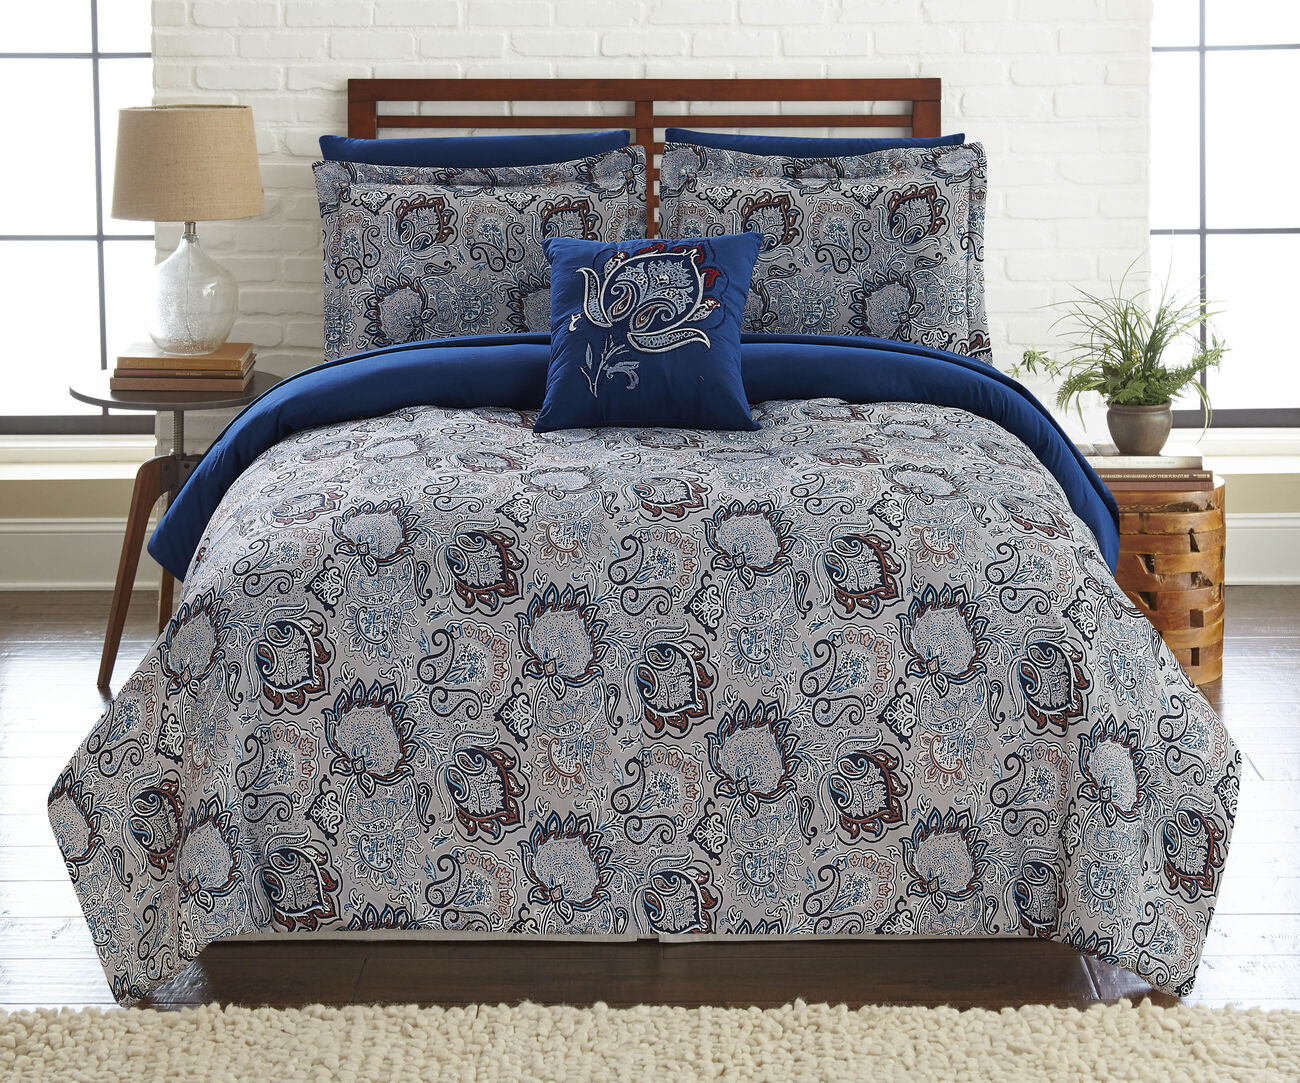 Caen 8 Piece Printed California King Reversible Bed Set The Urban Port, Gray and Blue